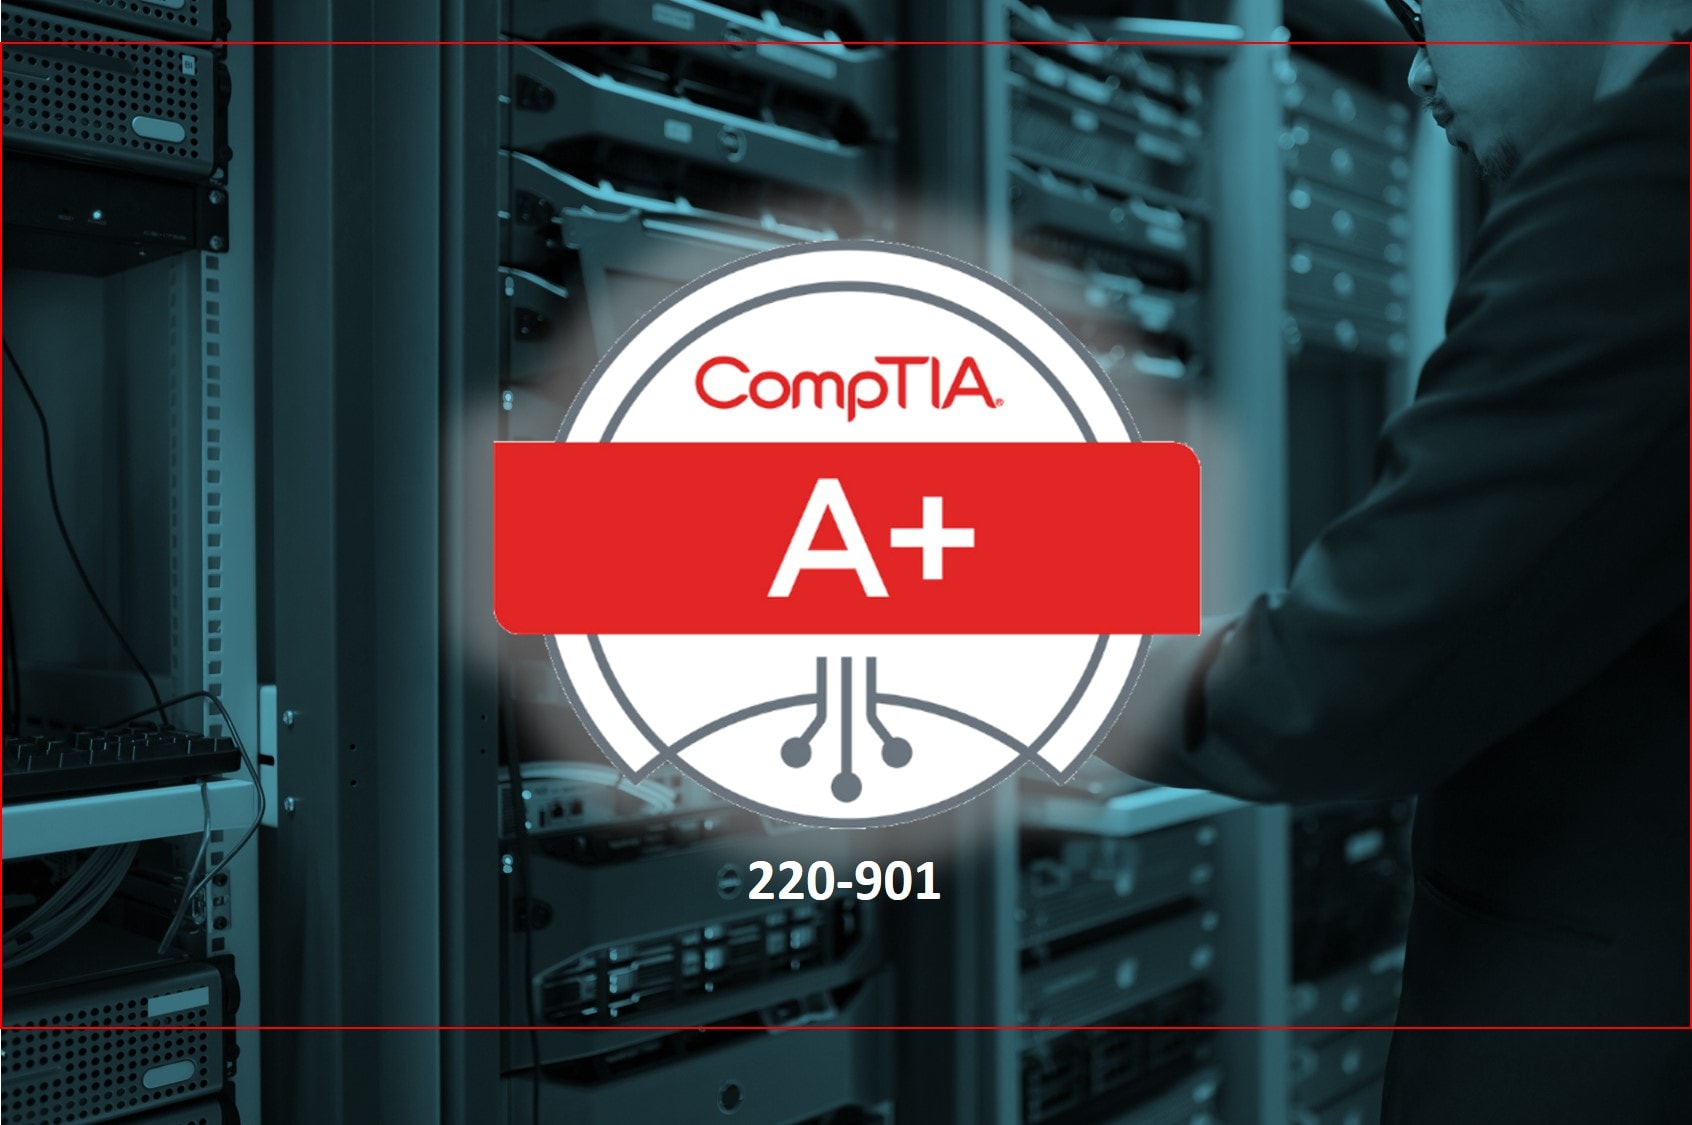 computer network with comptia logo